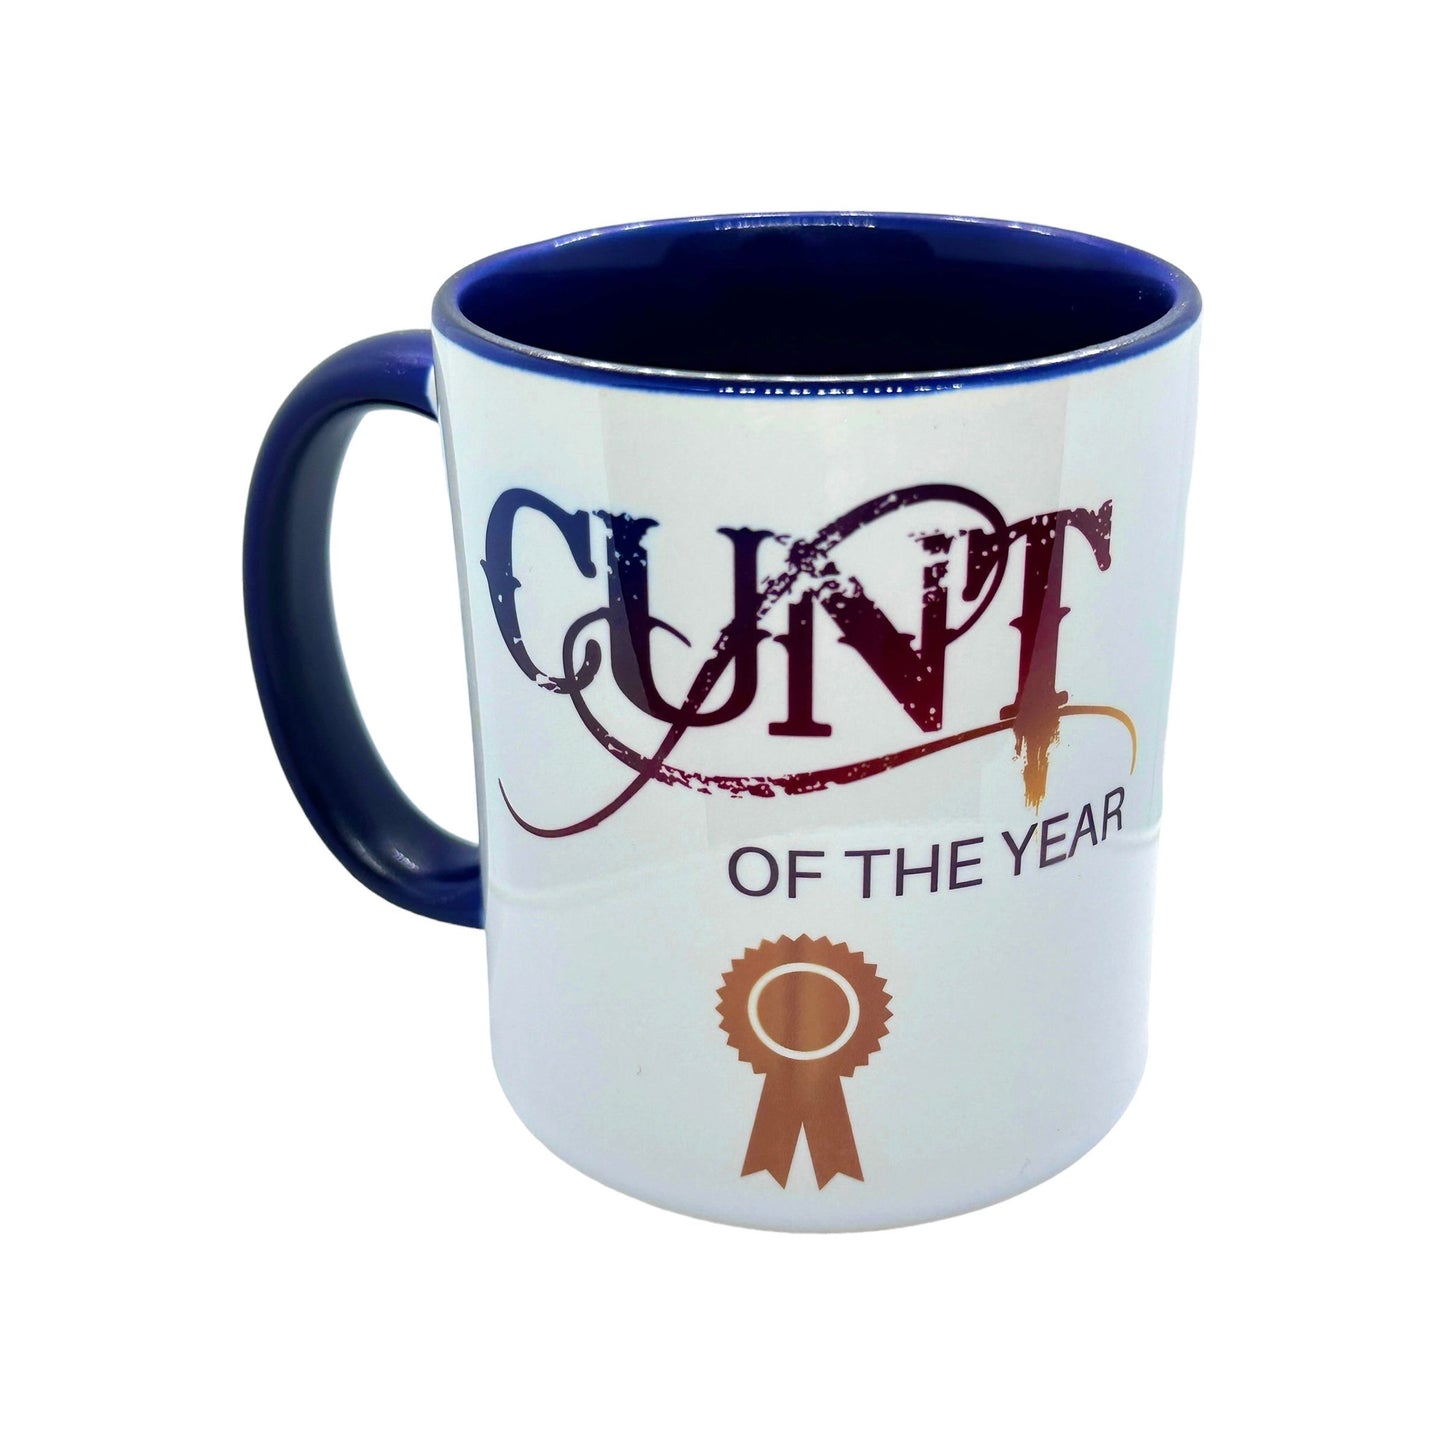 ".... of the year"